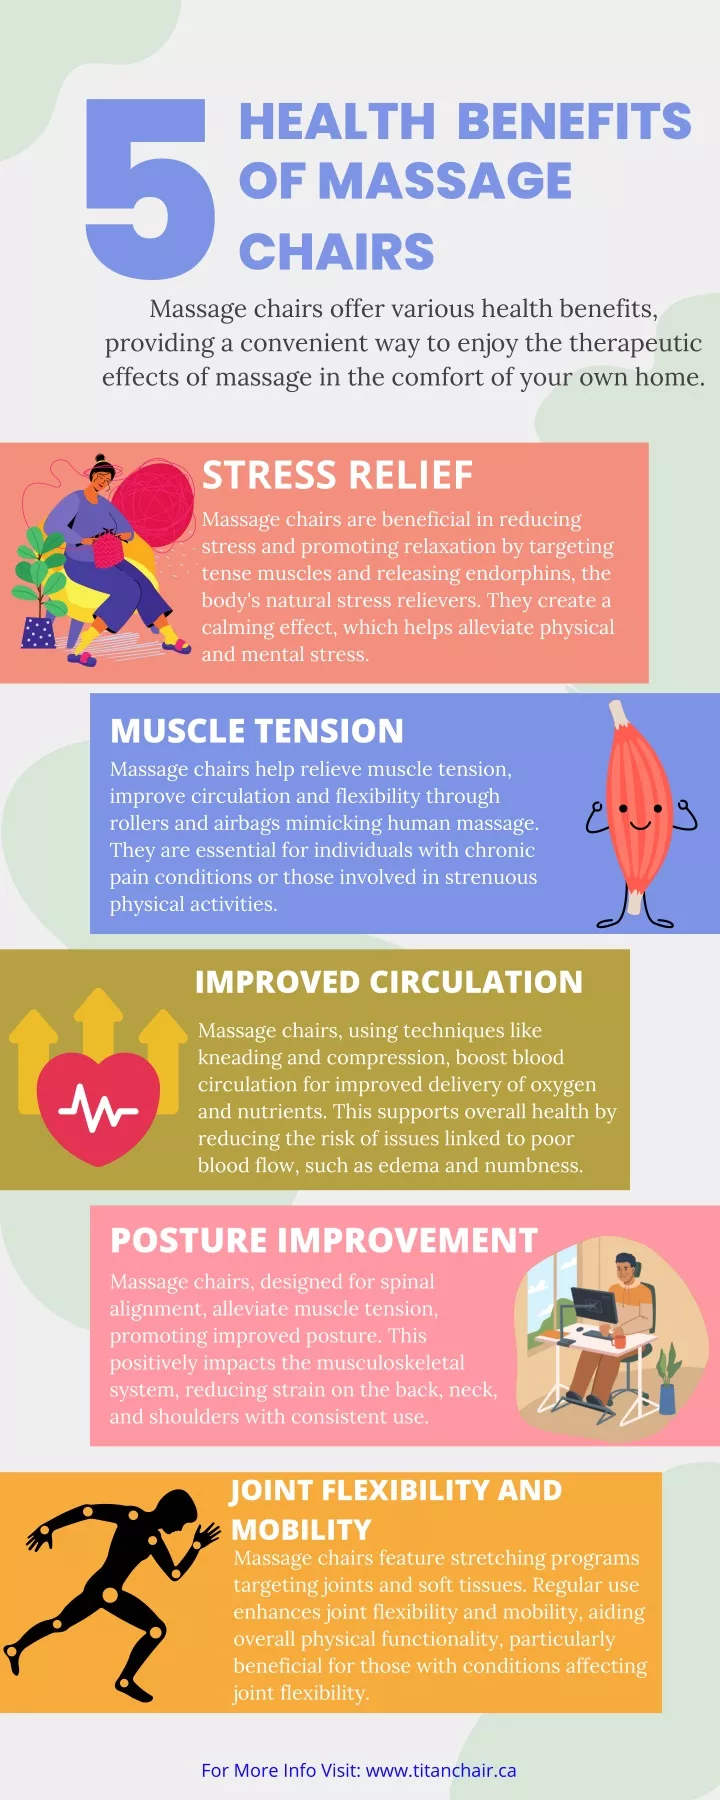 5 effects of massage in the comfort of your